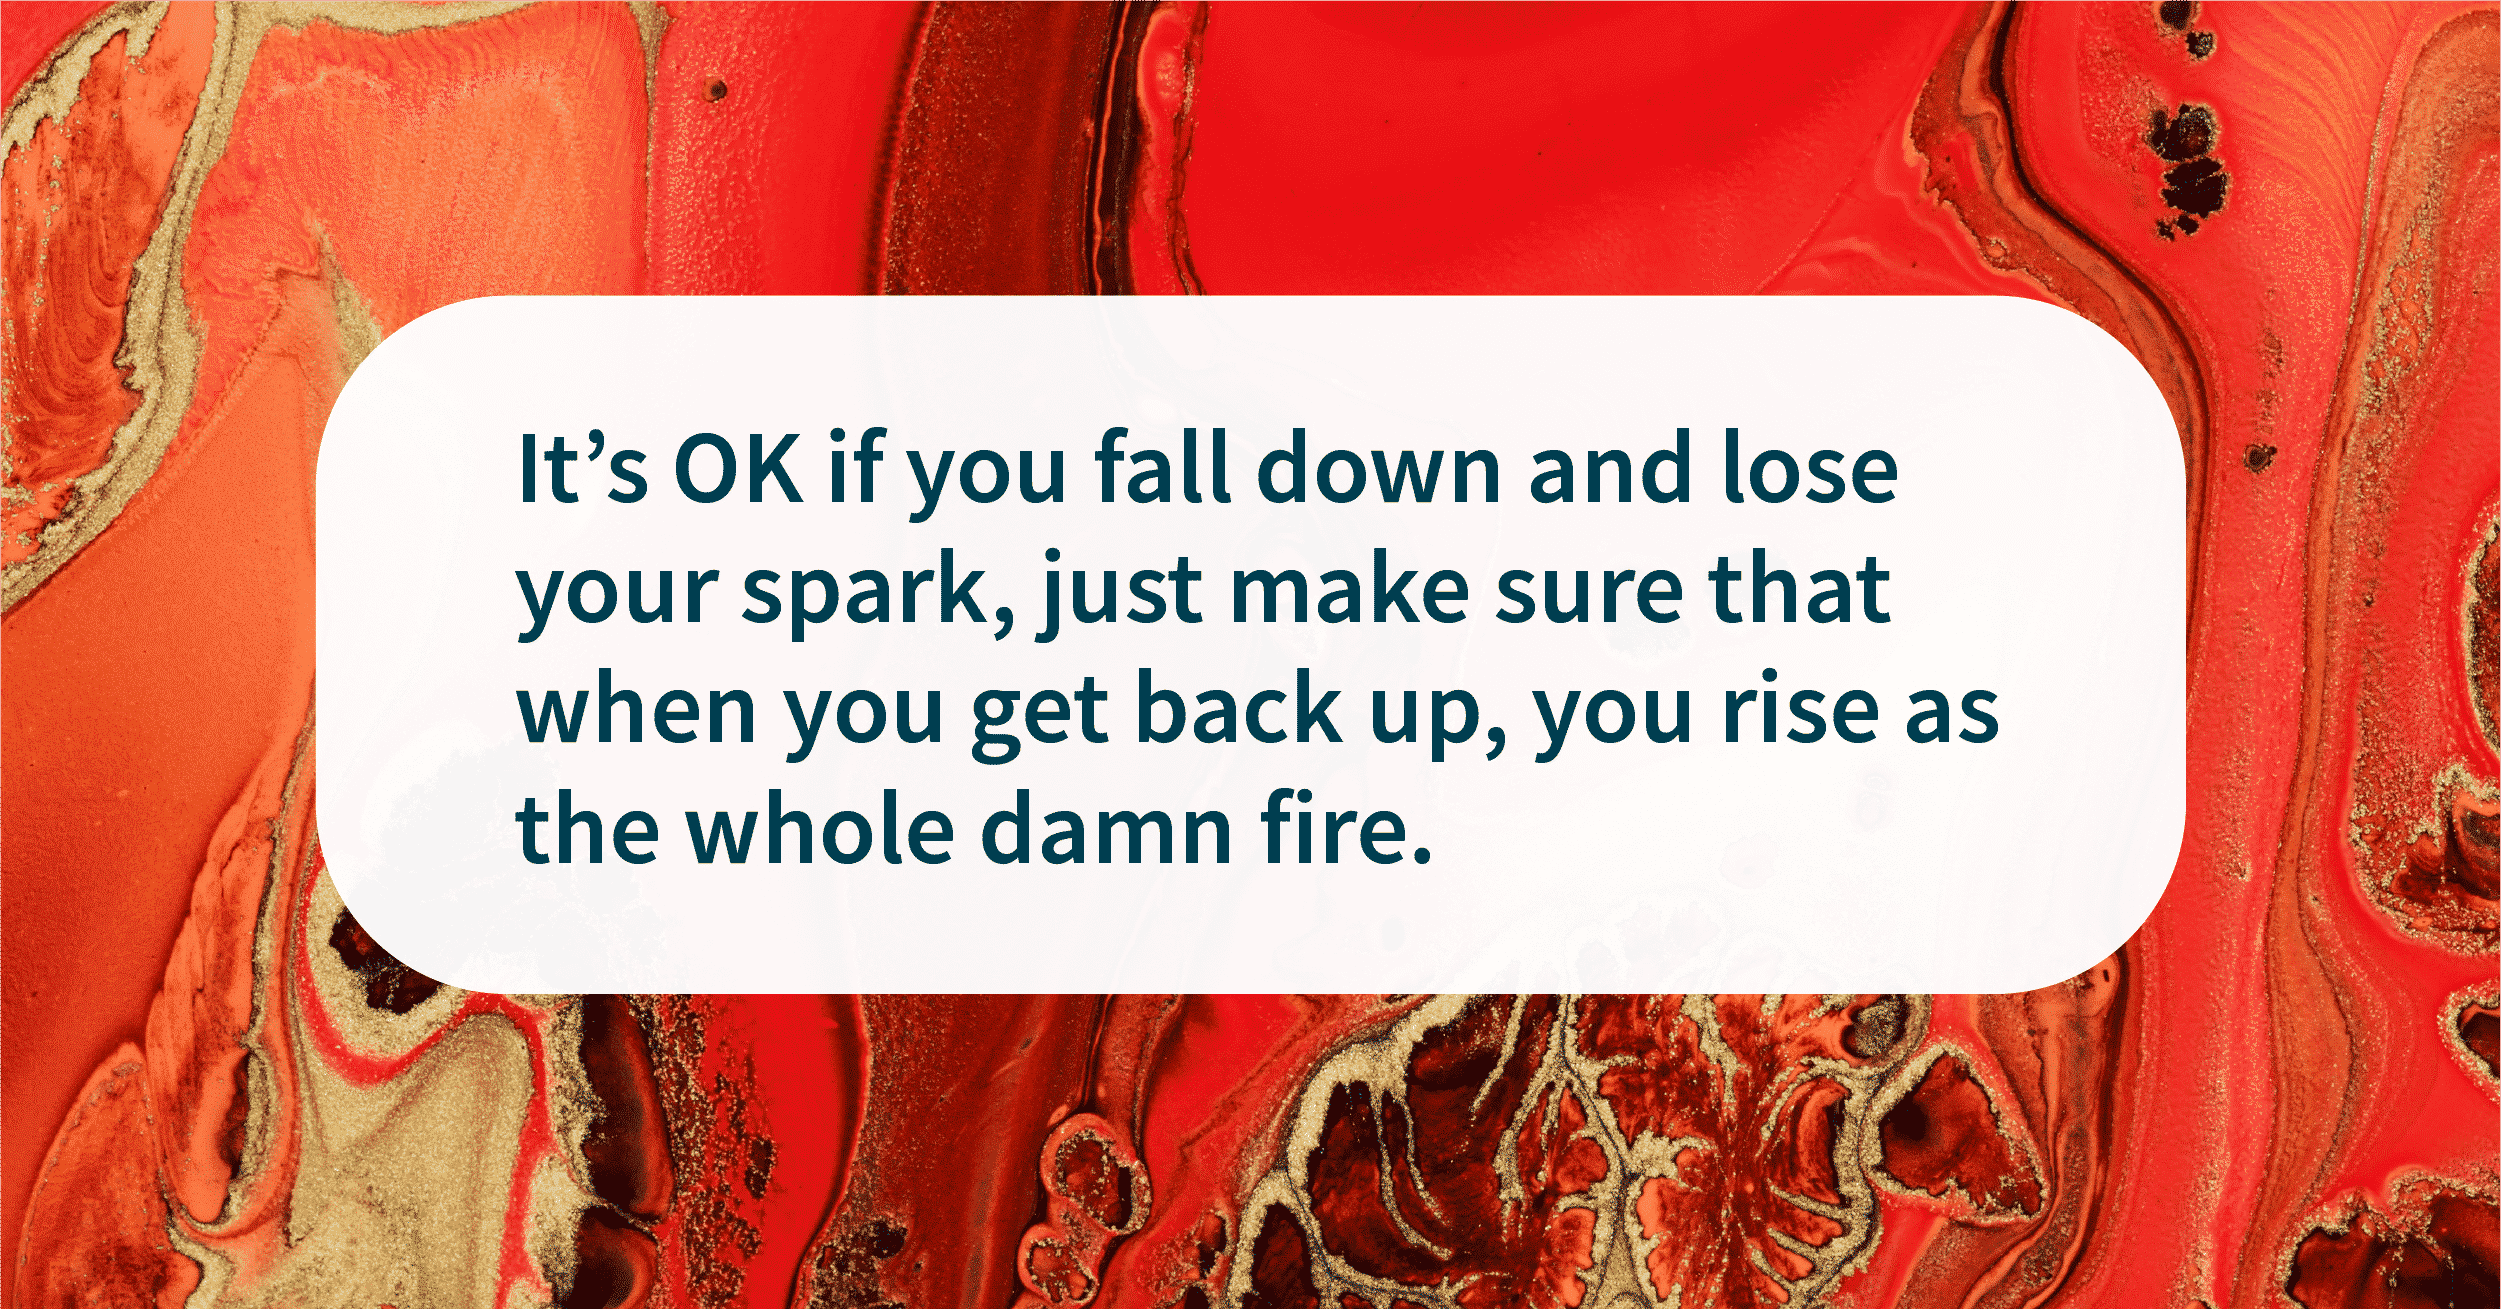 It's OK if you fall down and lose your spark. Just make sure that